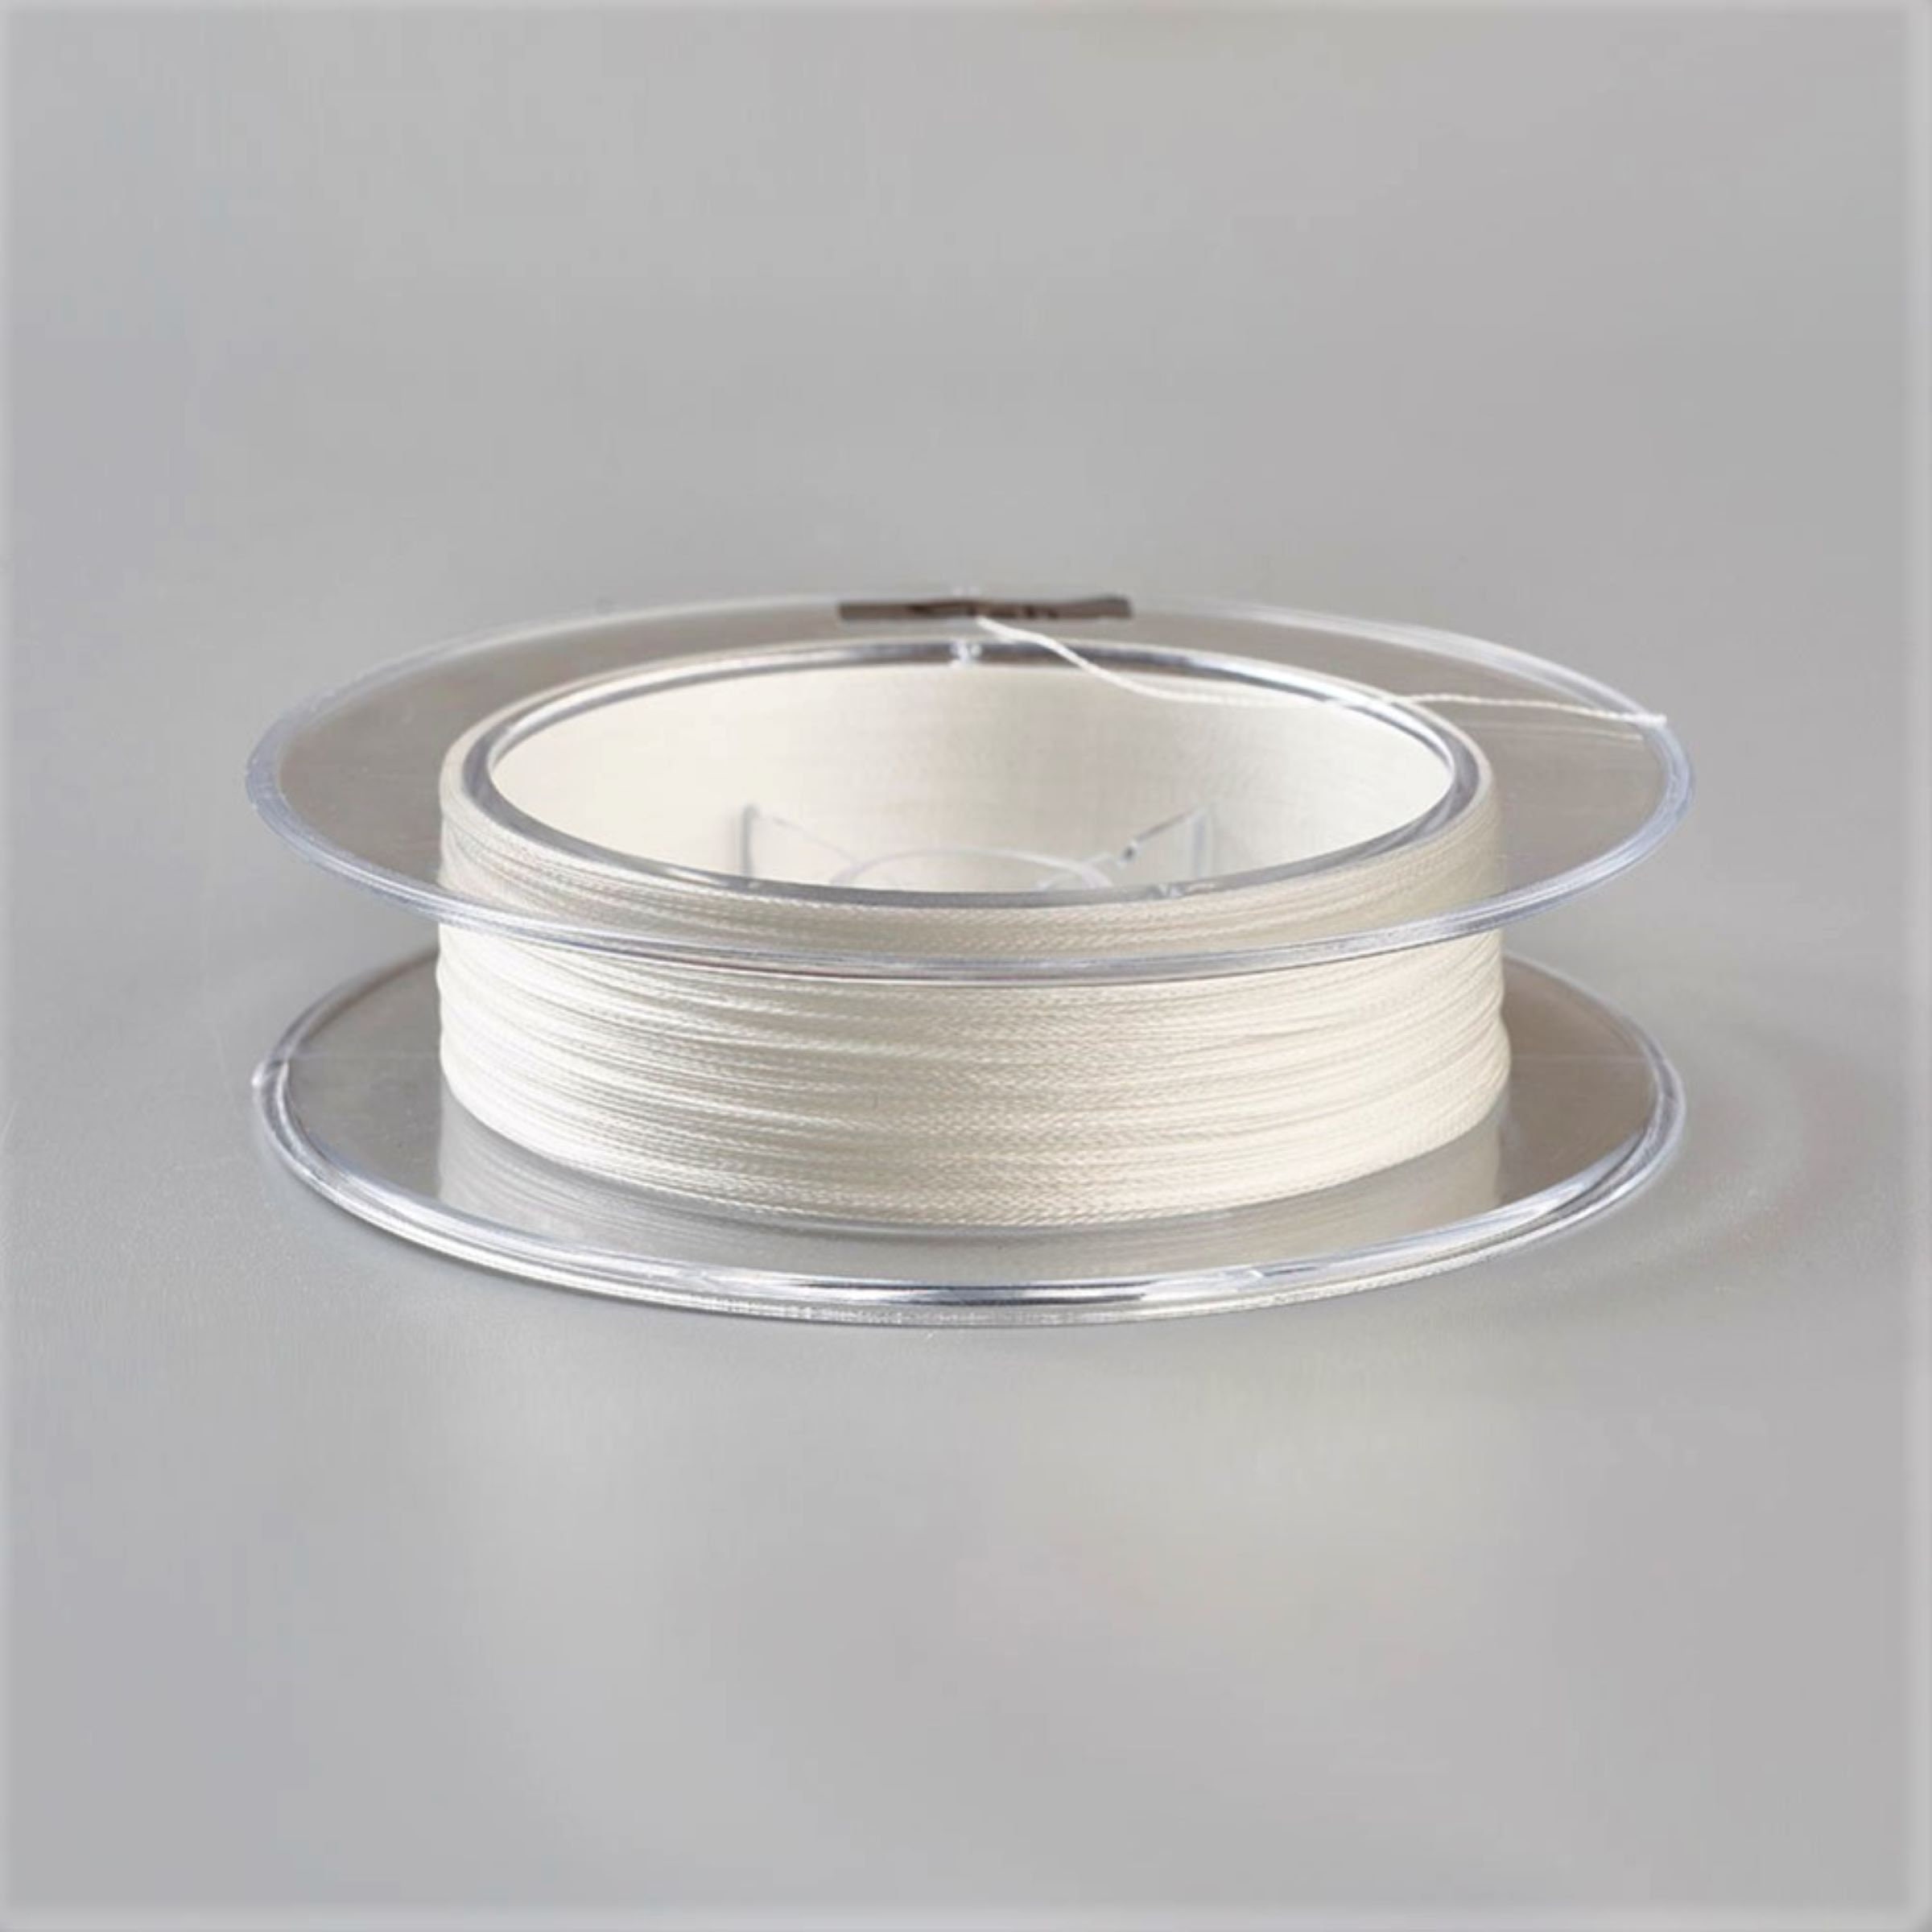 Buy Braided Fishing Line Online In India -  India